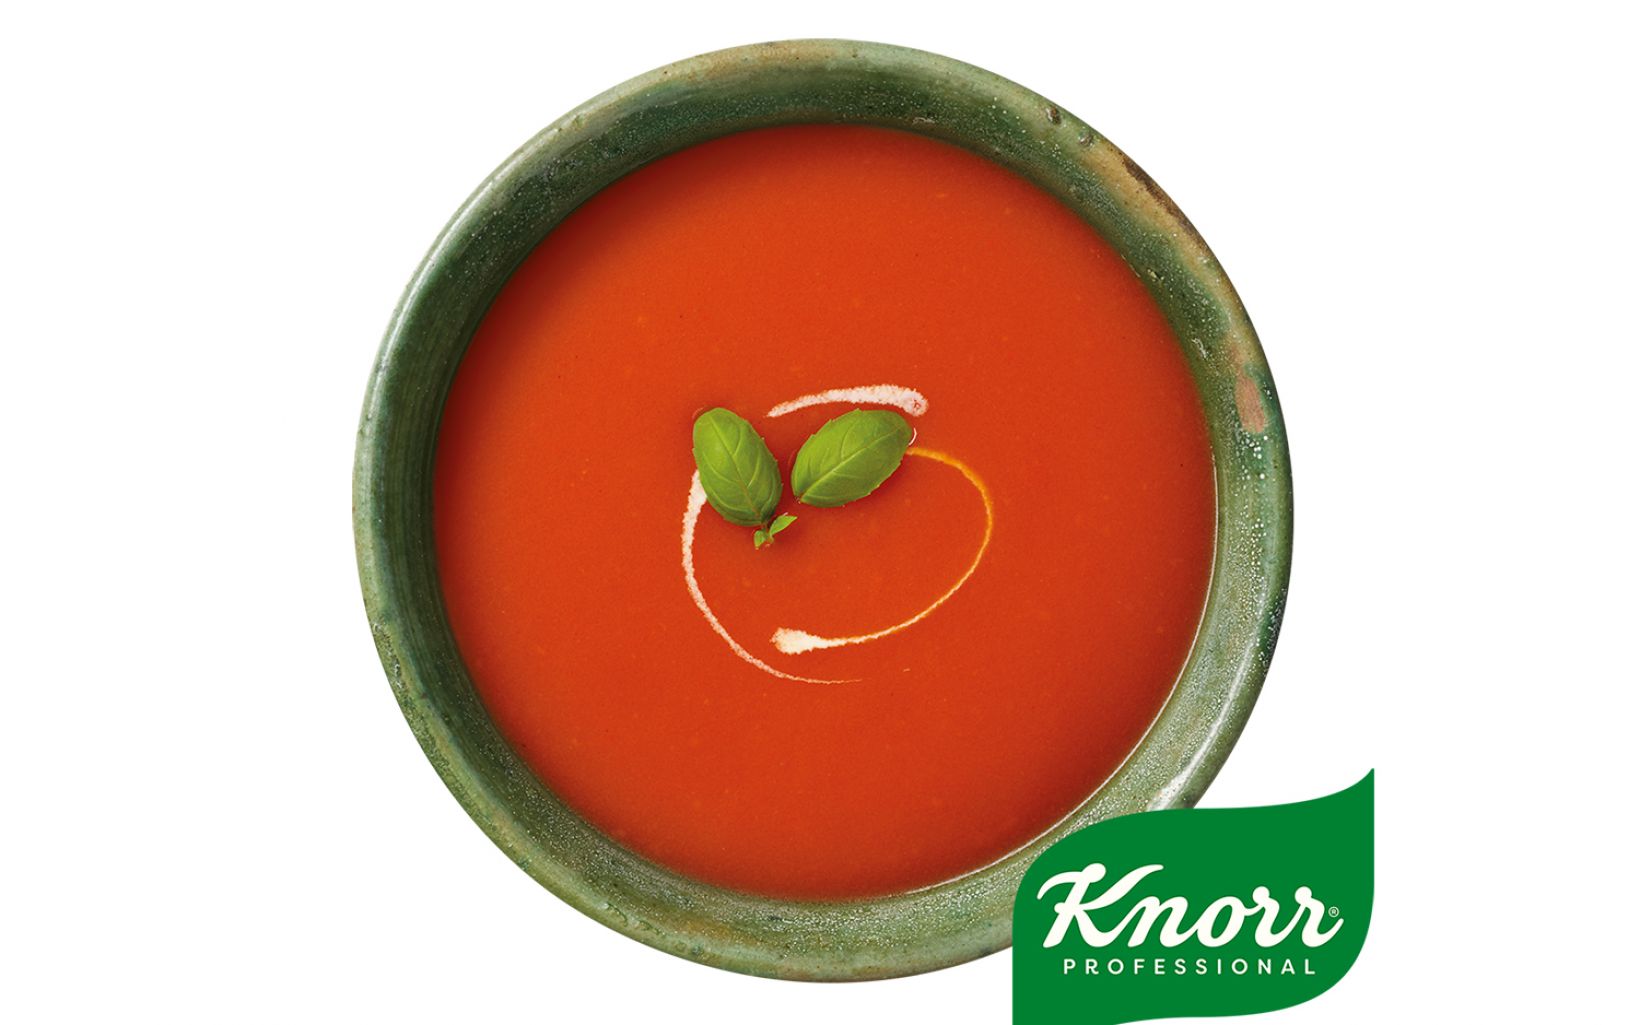 23664 34771 Uk Knorr Classic Cream Of Tomato Soup With Logo Supp Image 1200x1200px 20203pm Edit